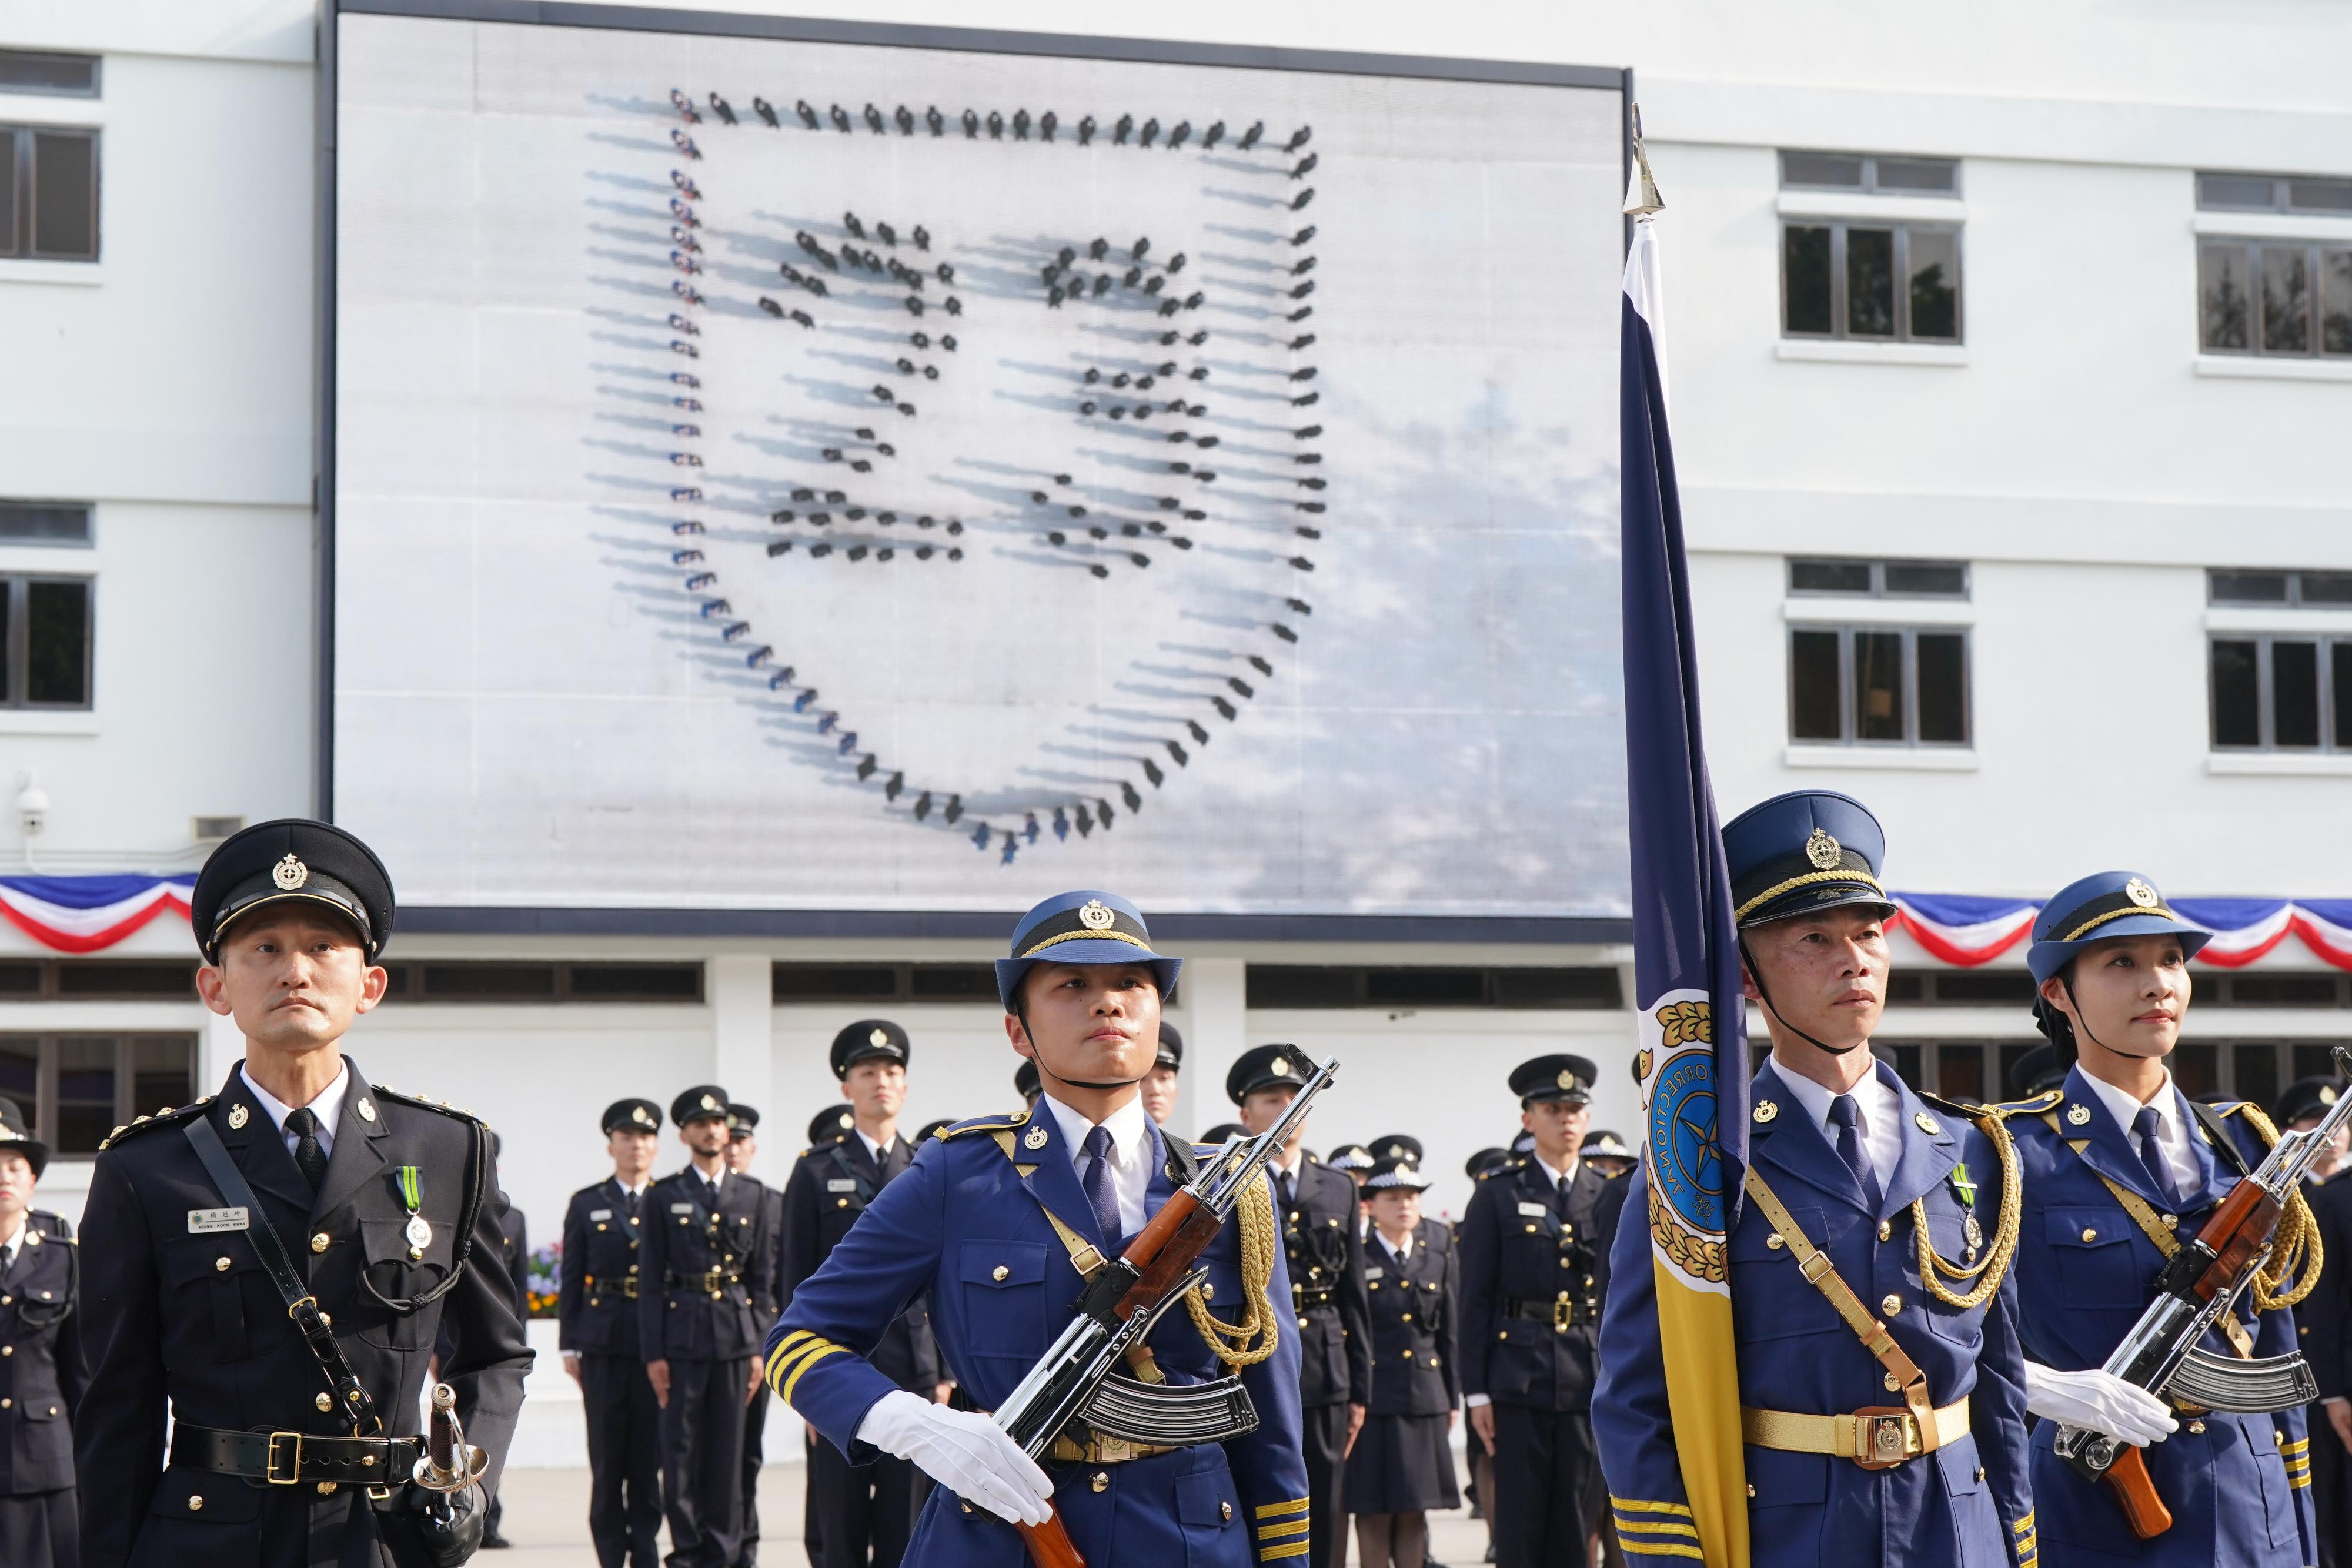 The Correctional Services Department held a passing-out parade at the Hong Kong Correctional Services Academy today (March 22). Photo shows passing-out correctional officers assembling to form a shield pattern incorporated with the number "23", symbolising that the Safeguarding National Security Ordinance can safeguard the country and protect Hong Kong like a shield.